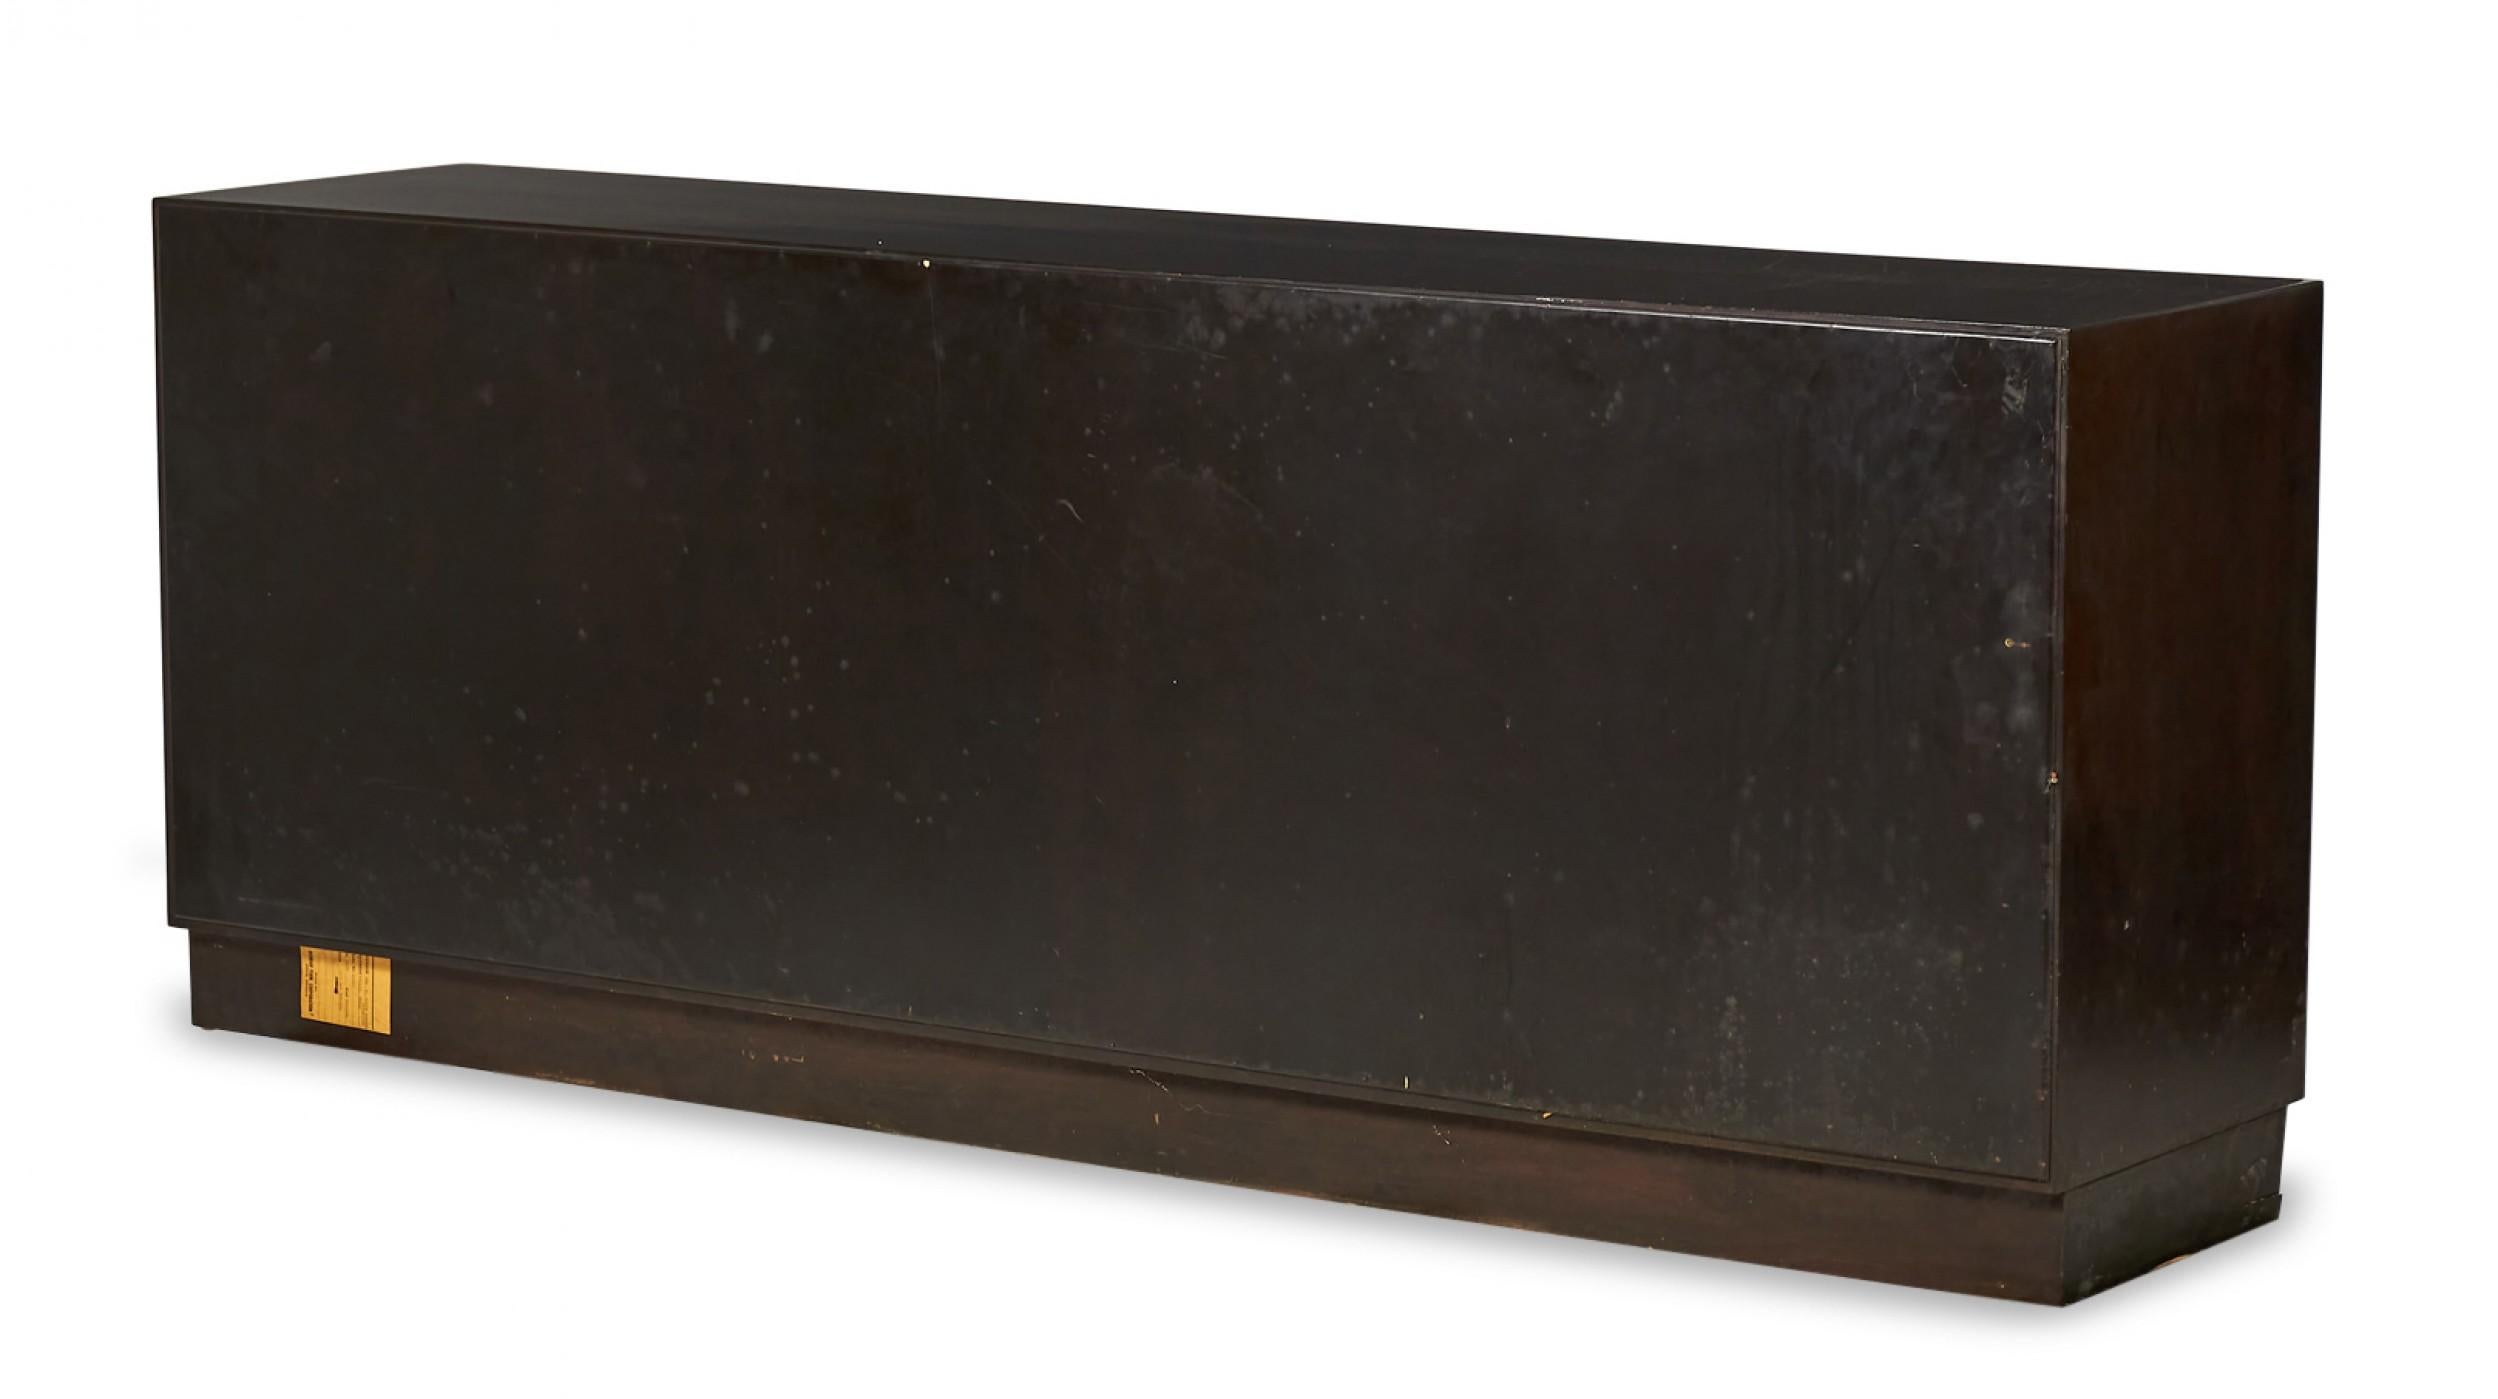 20th Century Edward Wormley for Dunbar Furniture Woven Front Dark Brown Mahogany Credenza For Sale